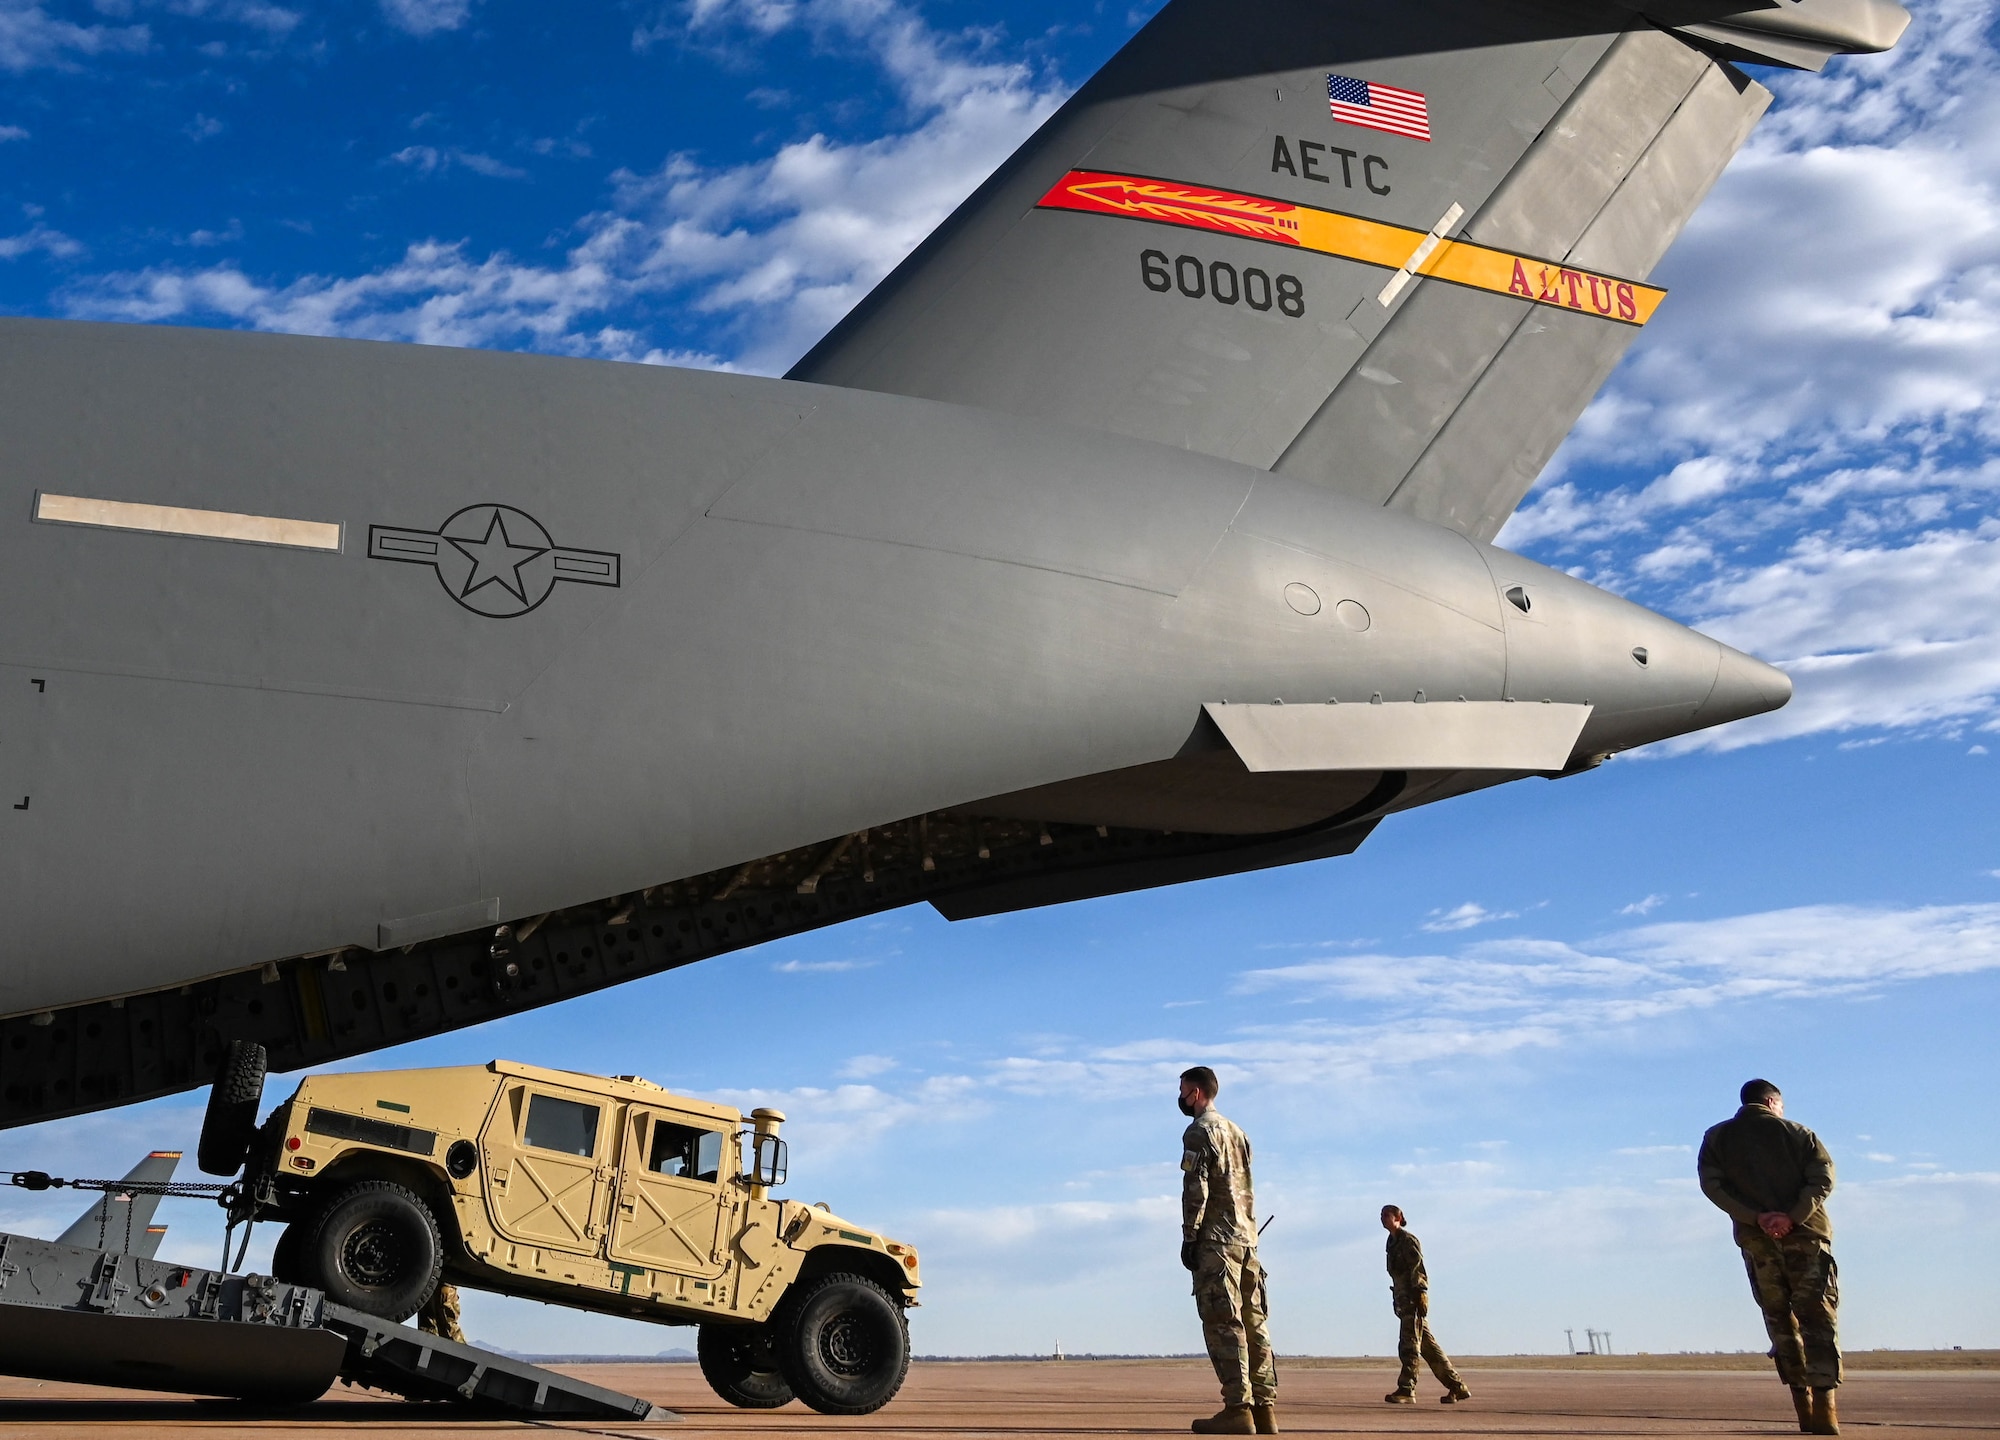 Reservists from the 730th Air Mobility Training Squadron, Altus Air Force Base, Oklahoma, prepare for a training sortie March 4, 2021. The 730th AMTS is a geographically separated unit of the 507th Operations Group, Tinker Air Force Base, Oklahoma, whose mission is to train future KC-135, KC-46 and C-17 pilots, KC-135 and KC-46 boom operators, and C-17 loadmasters. (U.S. Air Force photo by Senior Airman Mary Begy)